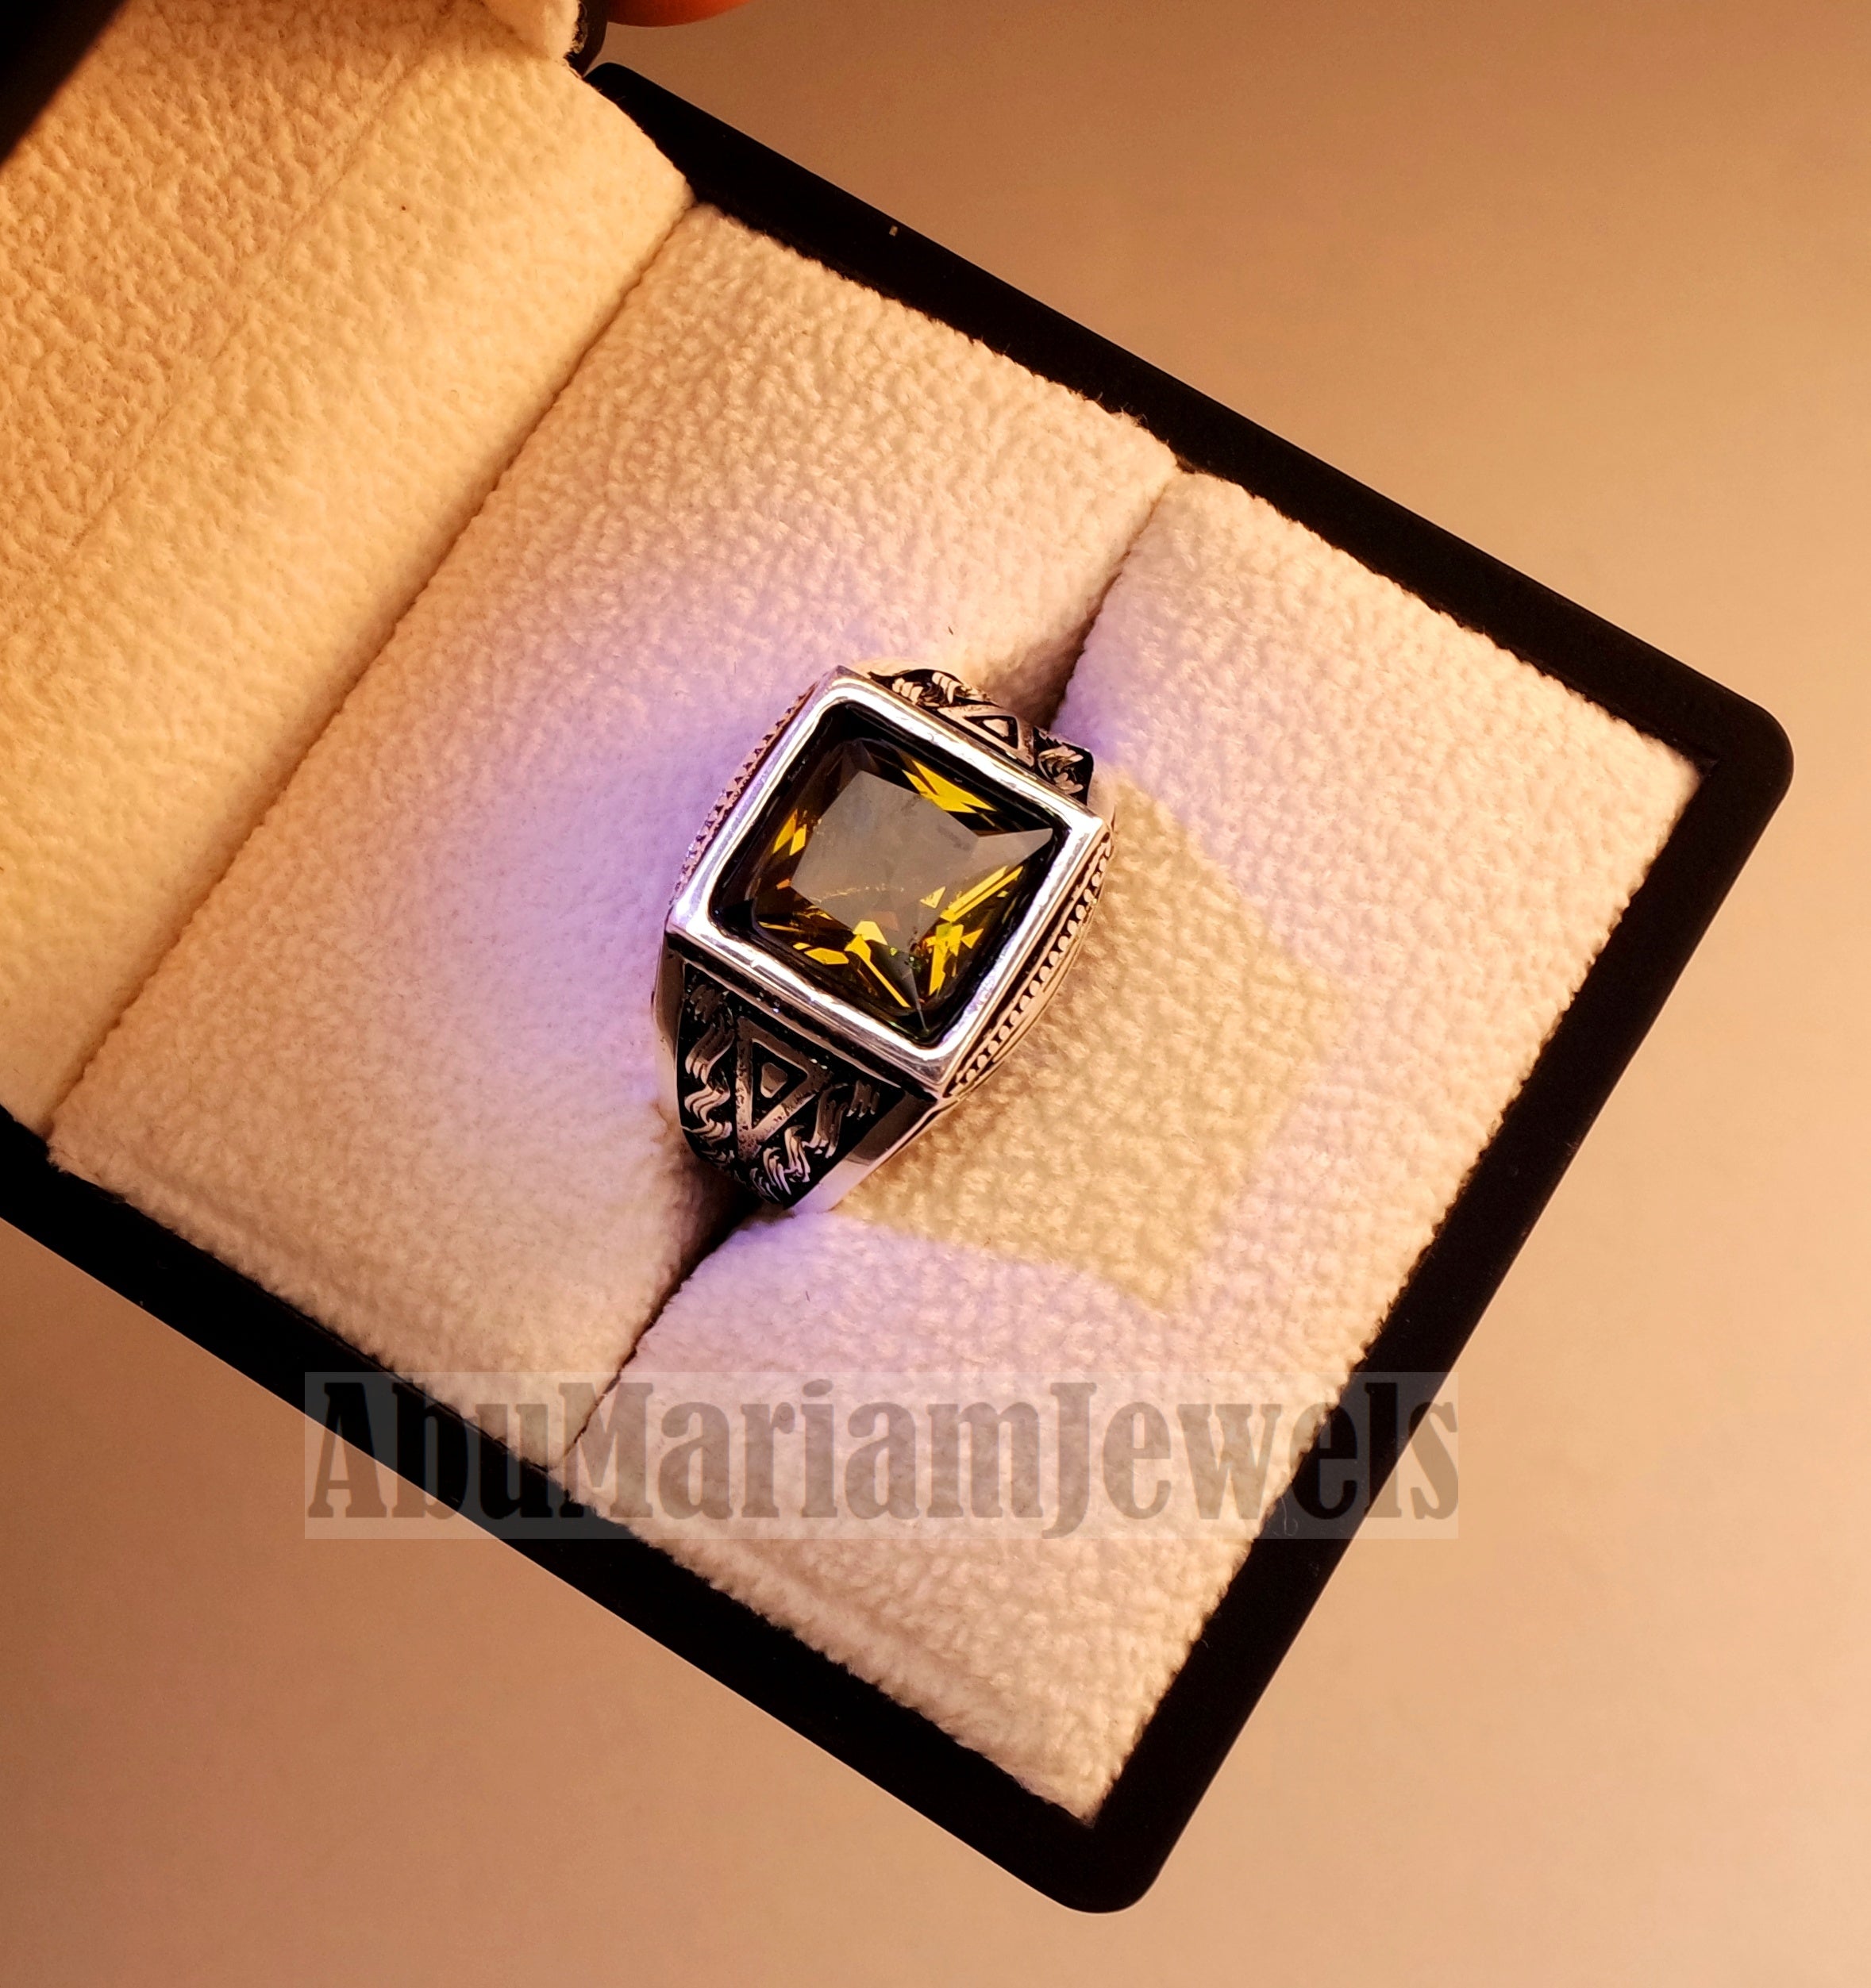 Zultanite natural changing color rare stone sterling silver 925 Diaspore men ring princess cut stone all sizes 3